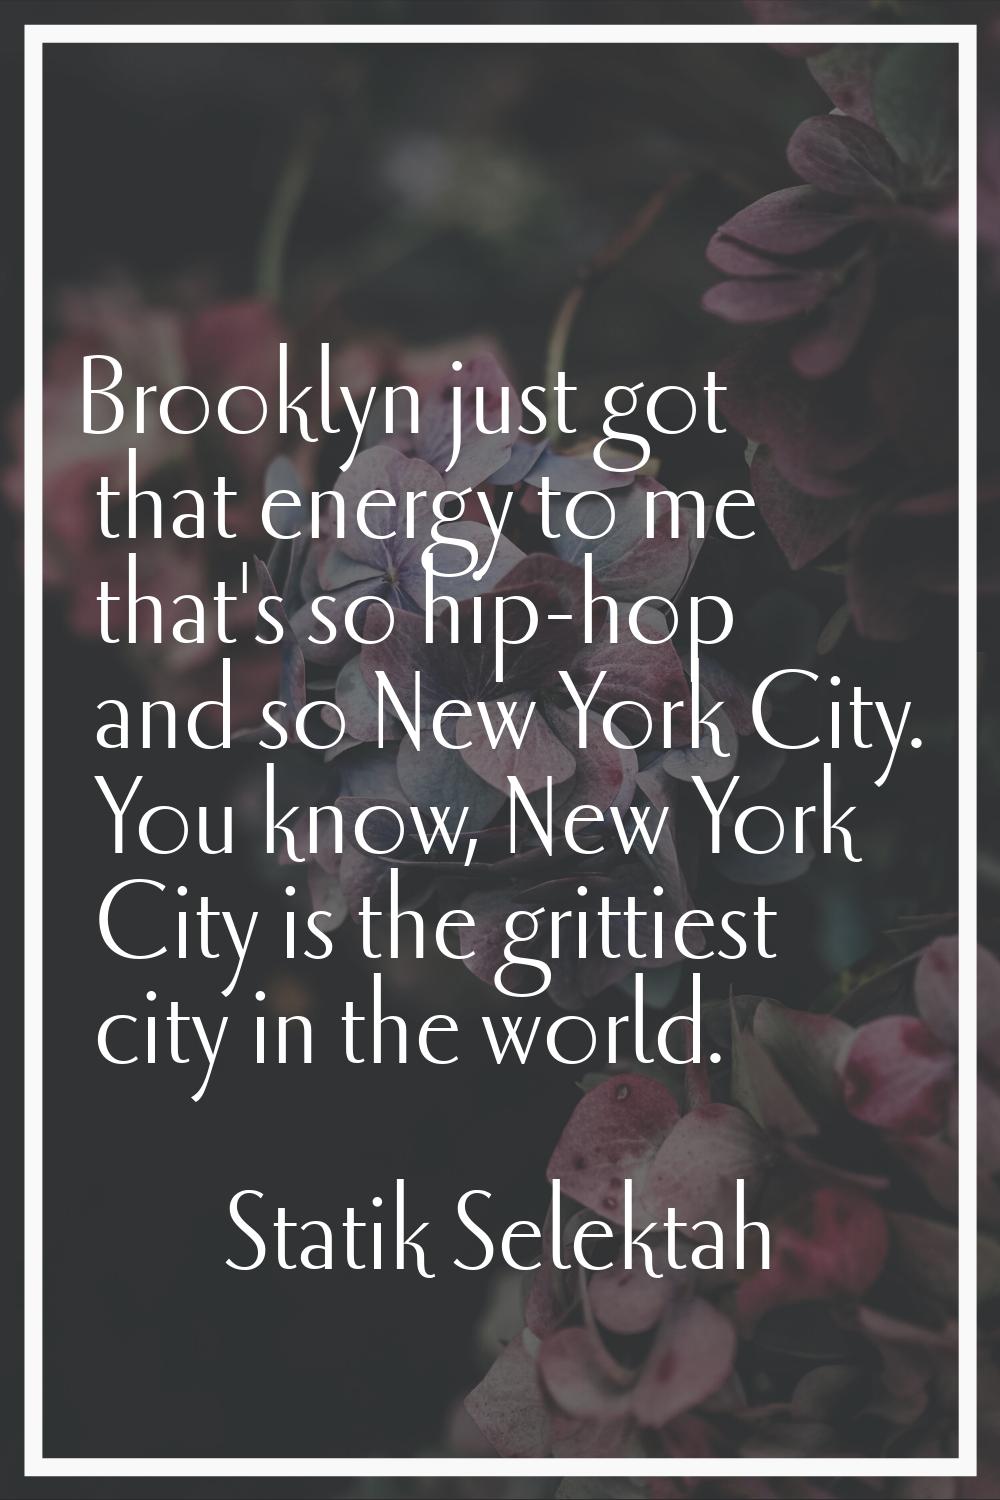 Brooklyn just got that energy to me that's so hip-hop and so New York City. You know, New York City